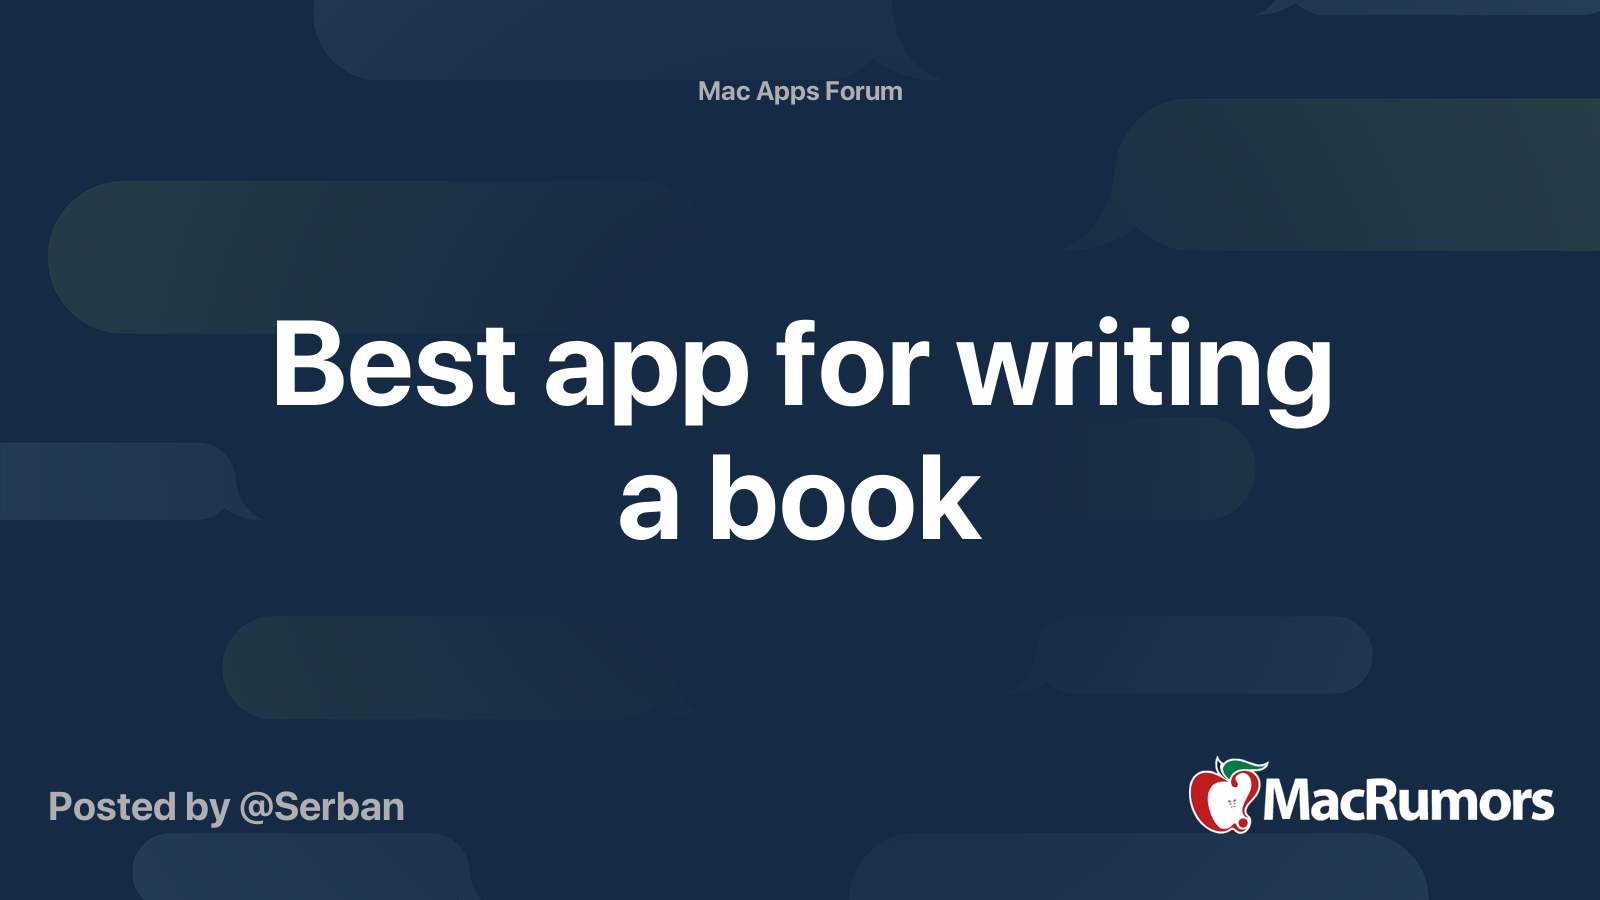 best-app-for-writing-a-book-macrumors-forums